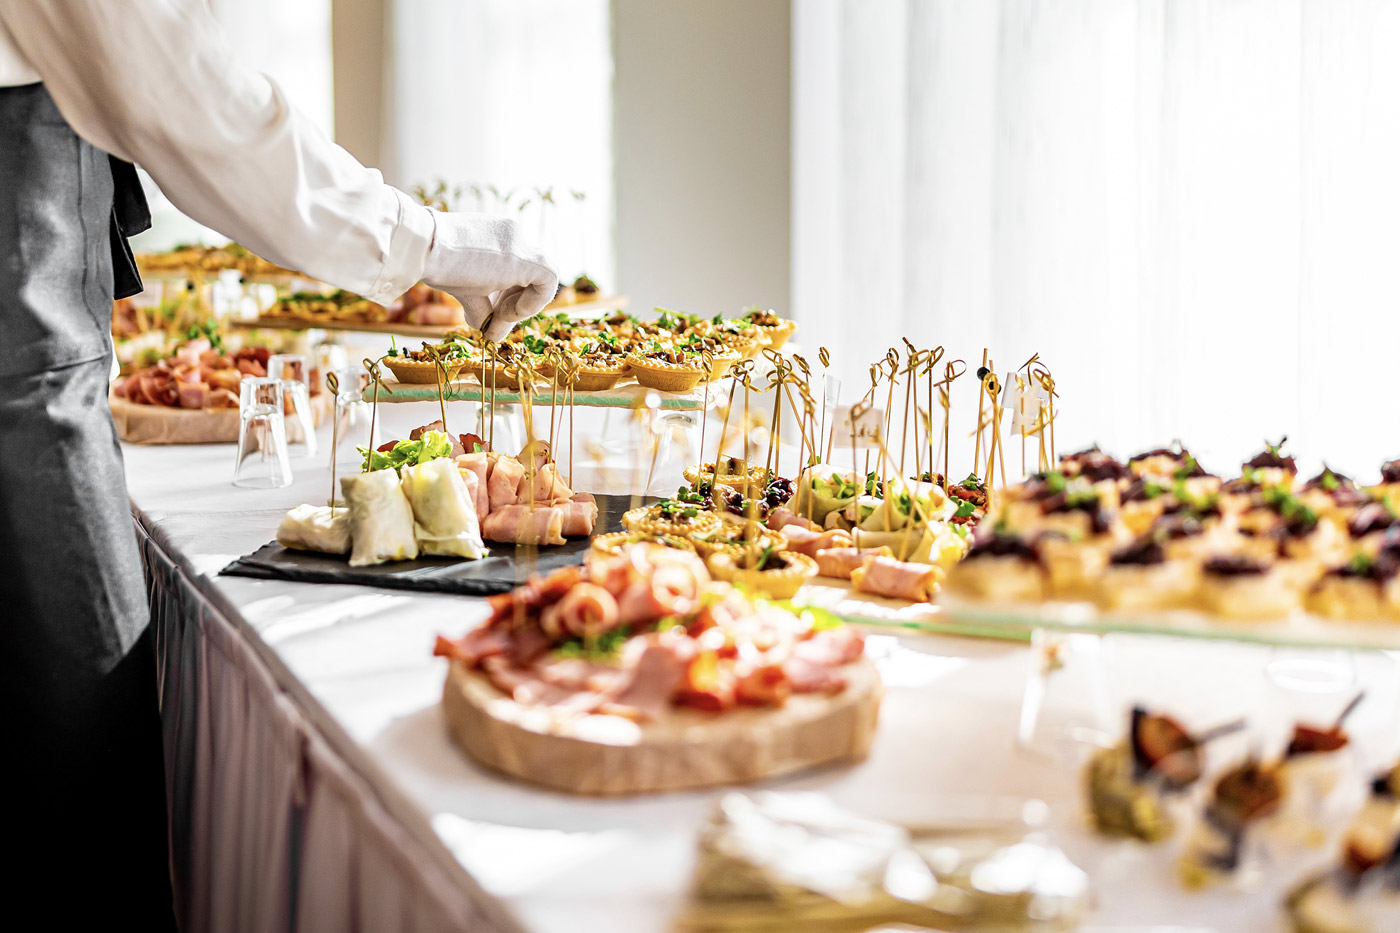 A buffet of canapes and charcuterie boards for a large catered event